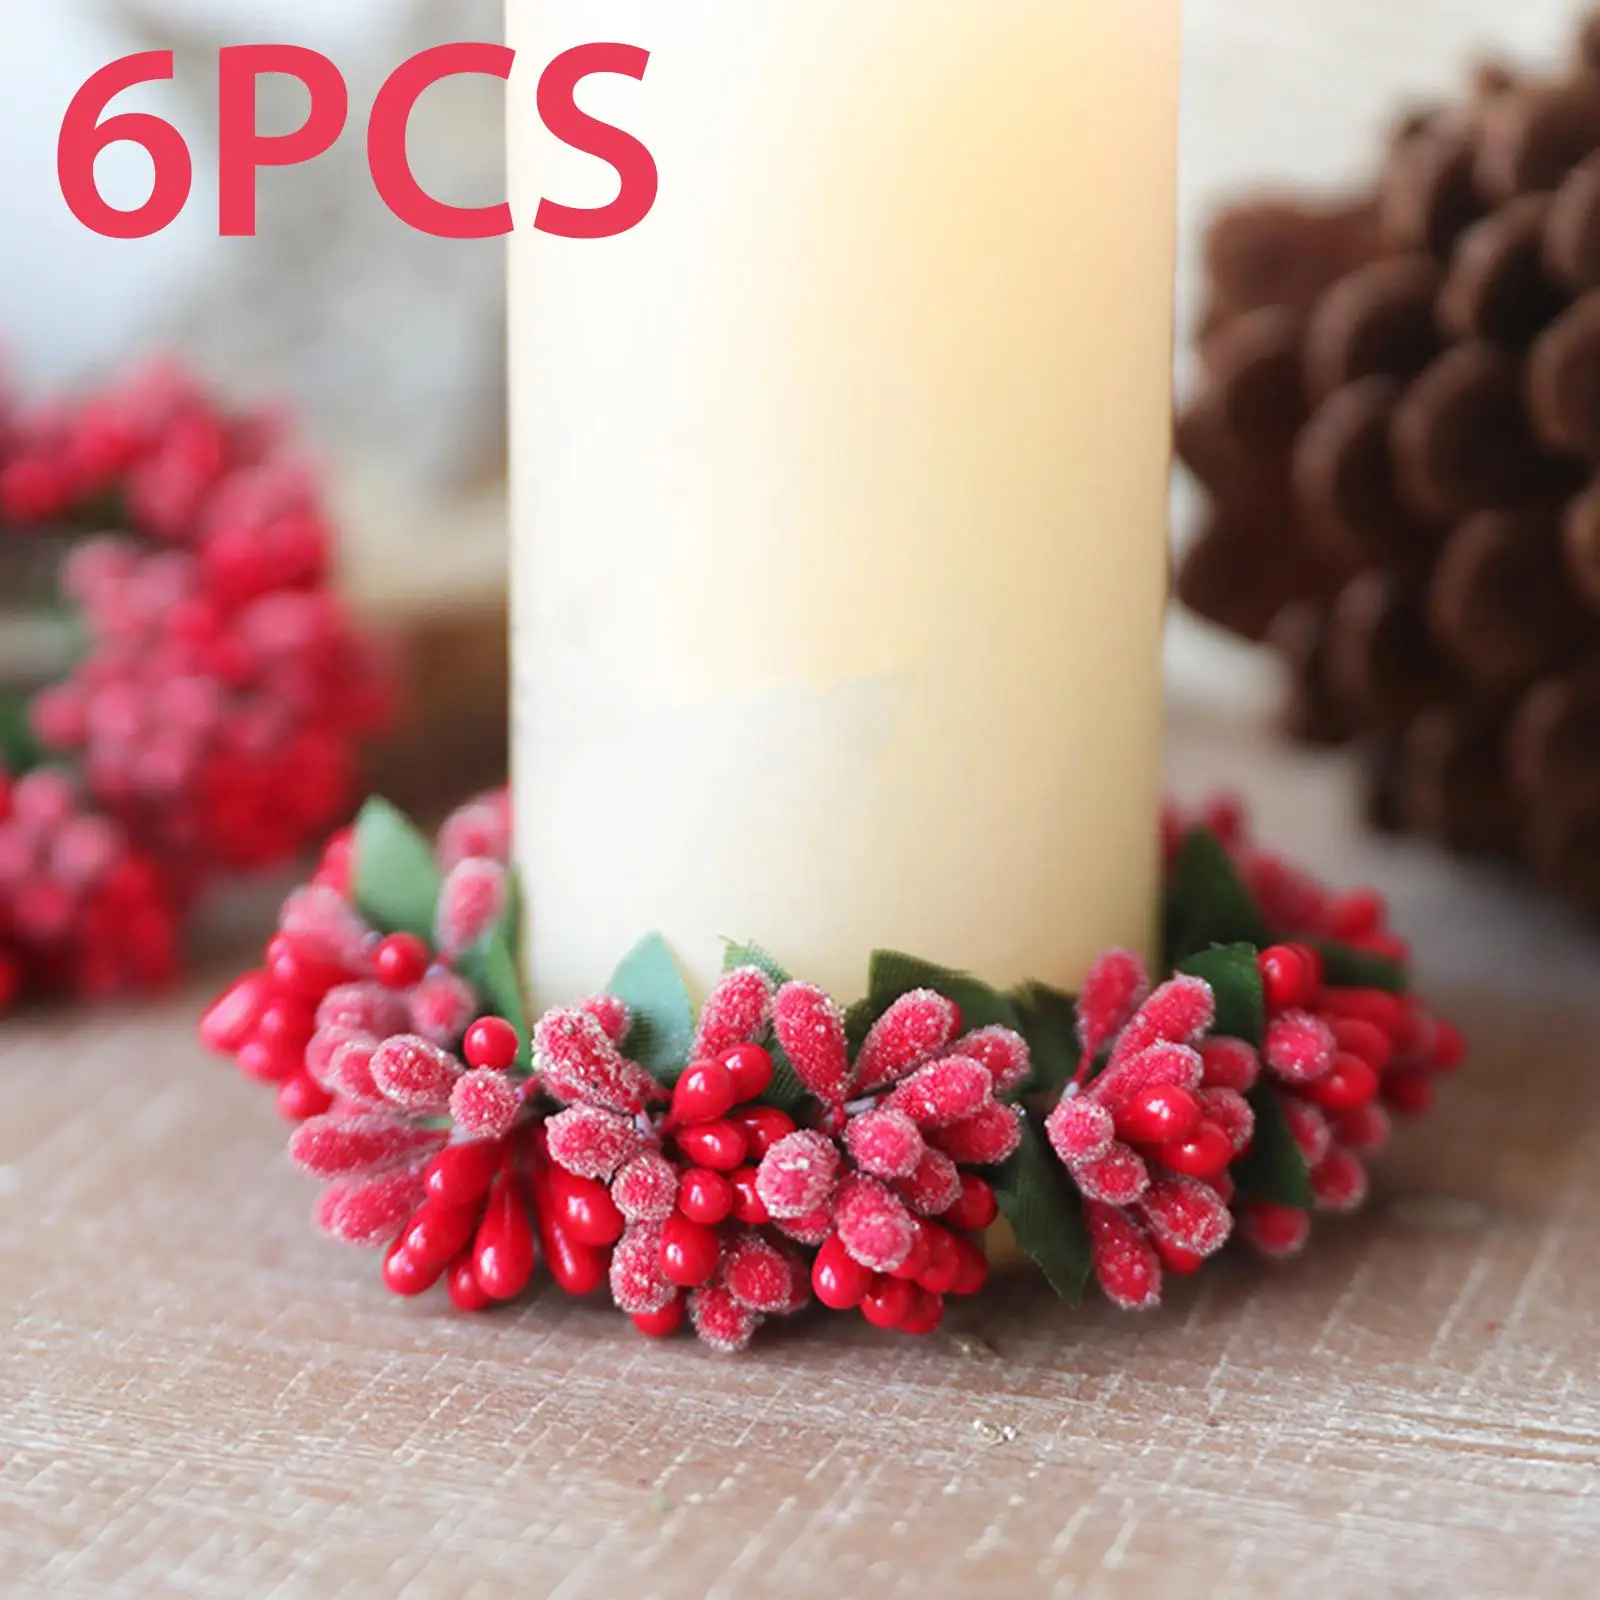 6Pcs Tea Light Candle Ring Wreath Christmas for Dinner Tabletop Thanksgiving